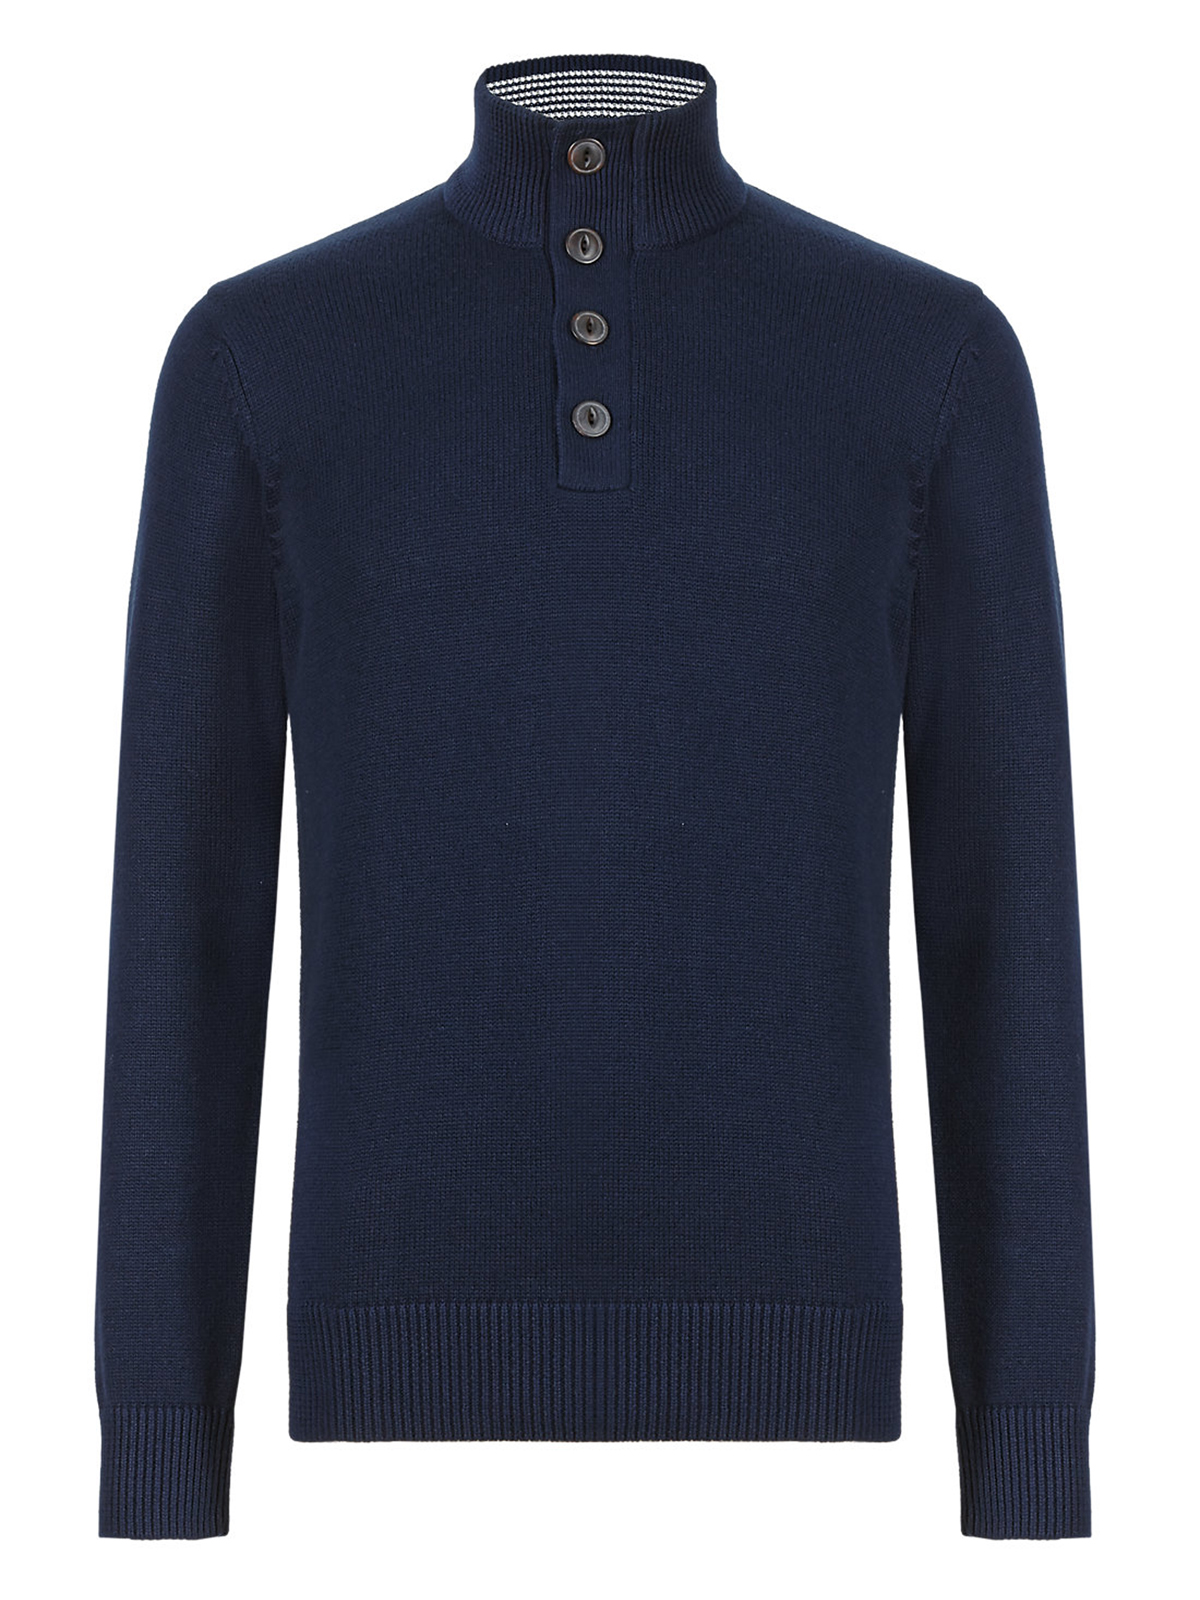 Marks and Spencer - - M&5 Blue H4arbour NAVY Pure Cotton Funnel Neck ...